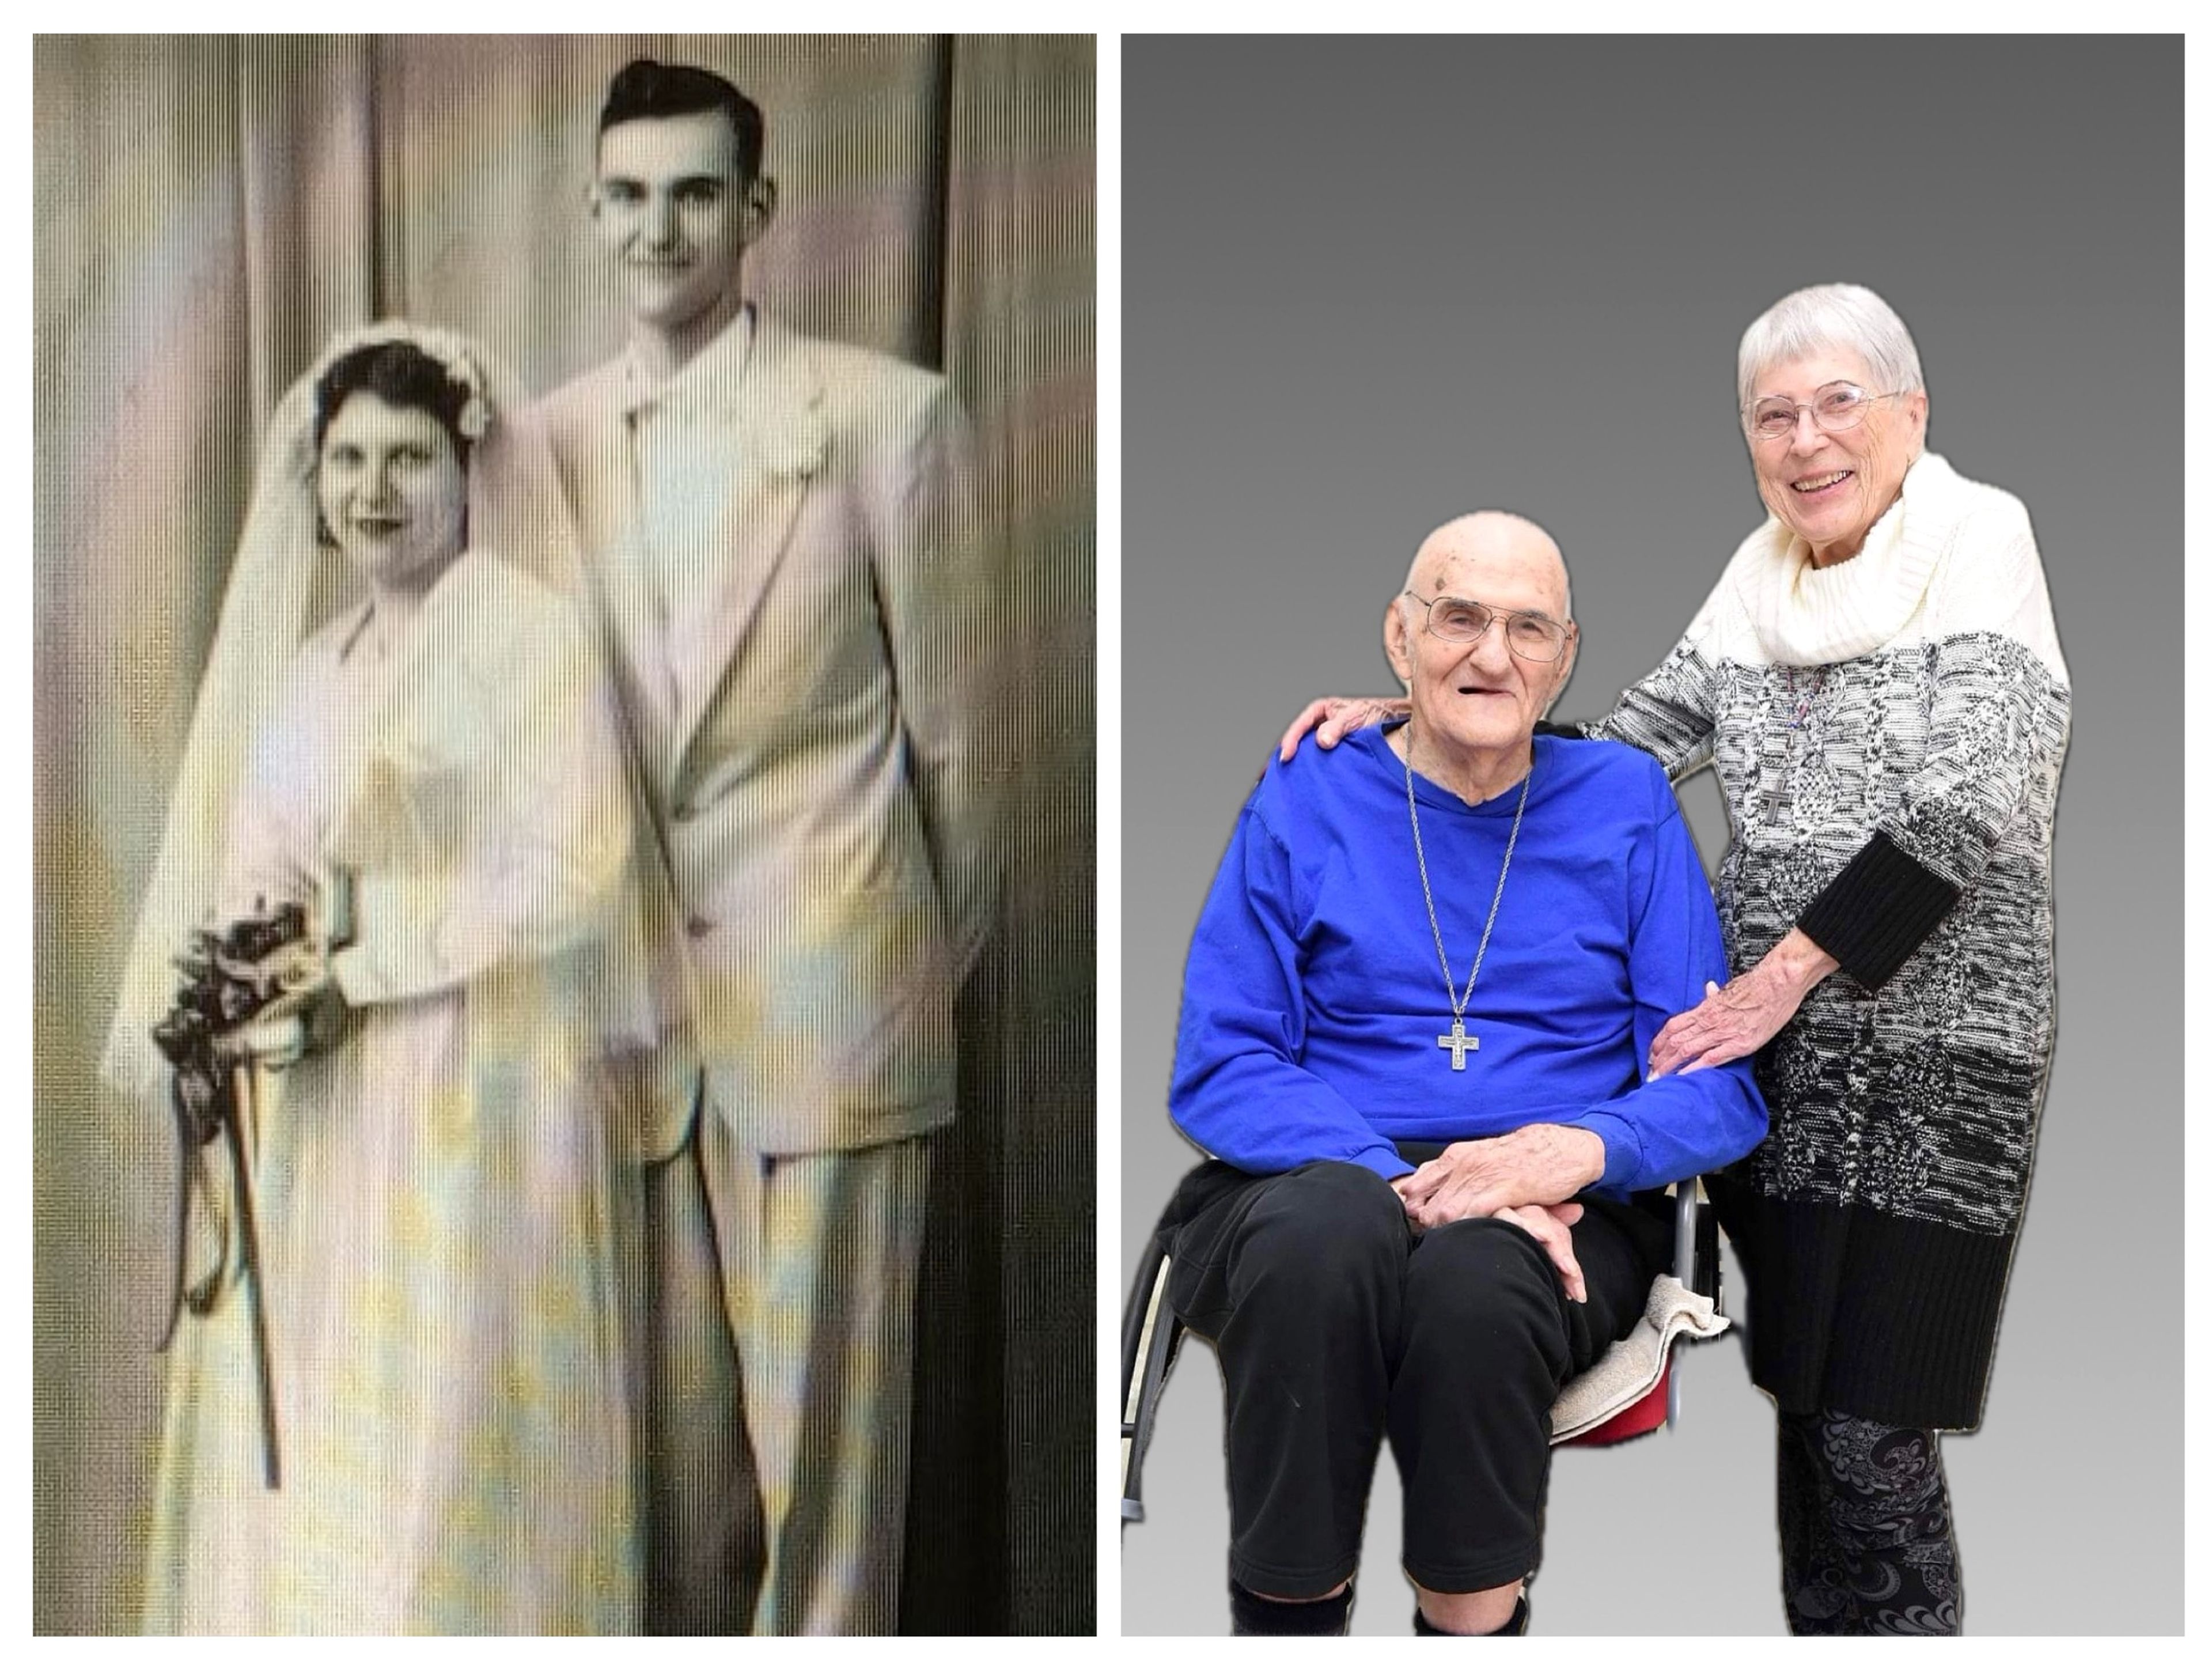 Mr. and Mrs. Don Blaylock are pictured on their wedding day and, now, 70 years later.